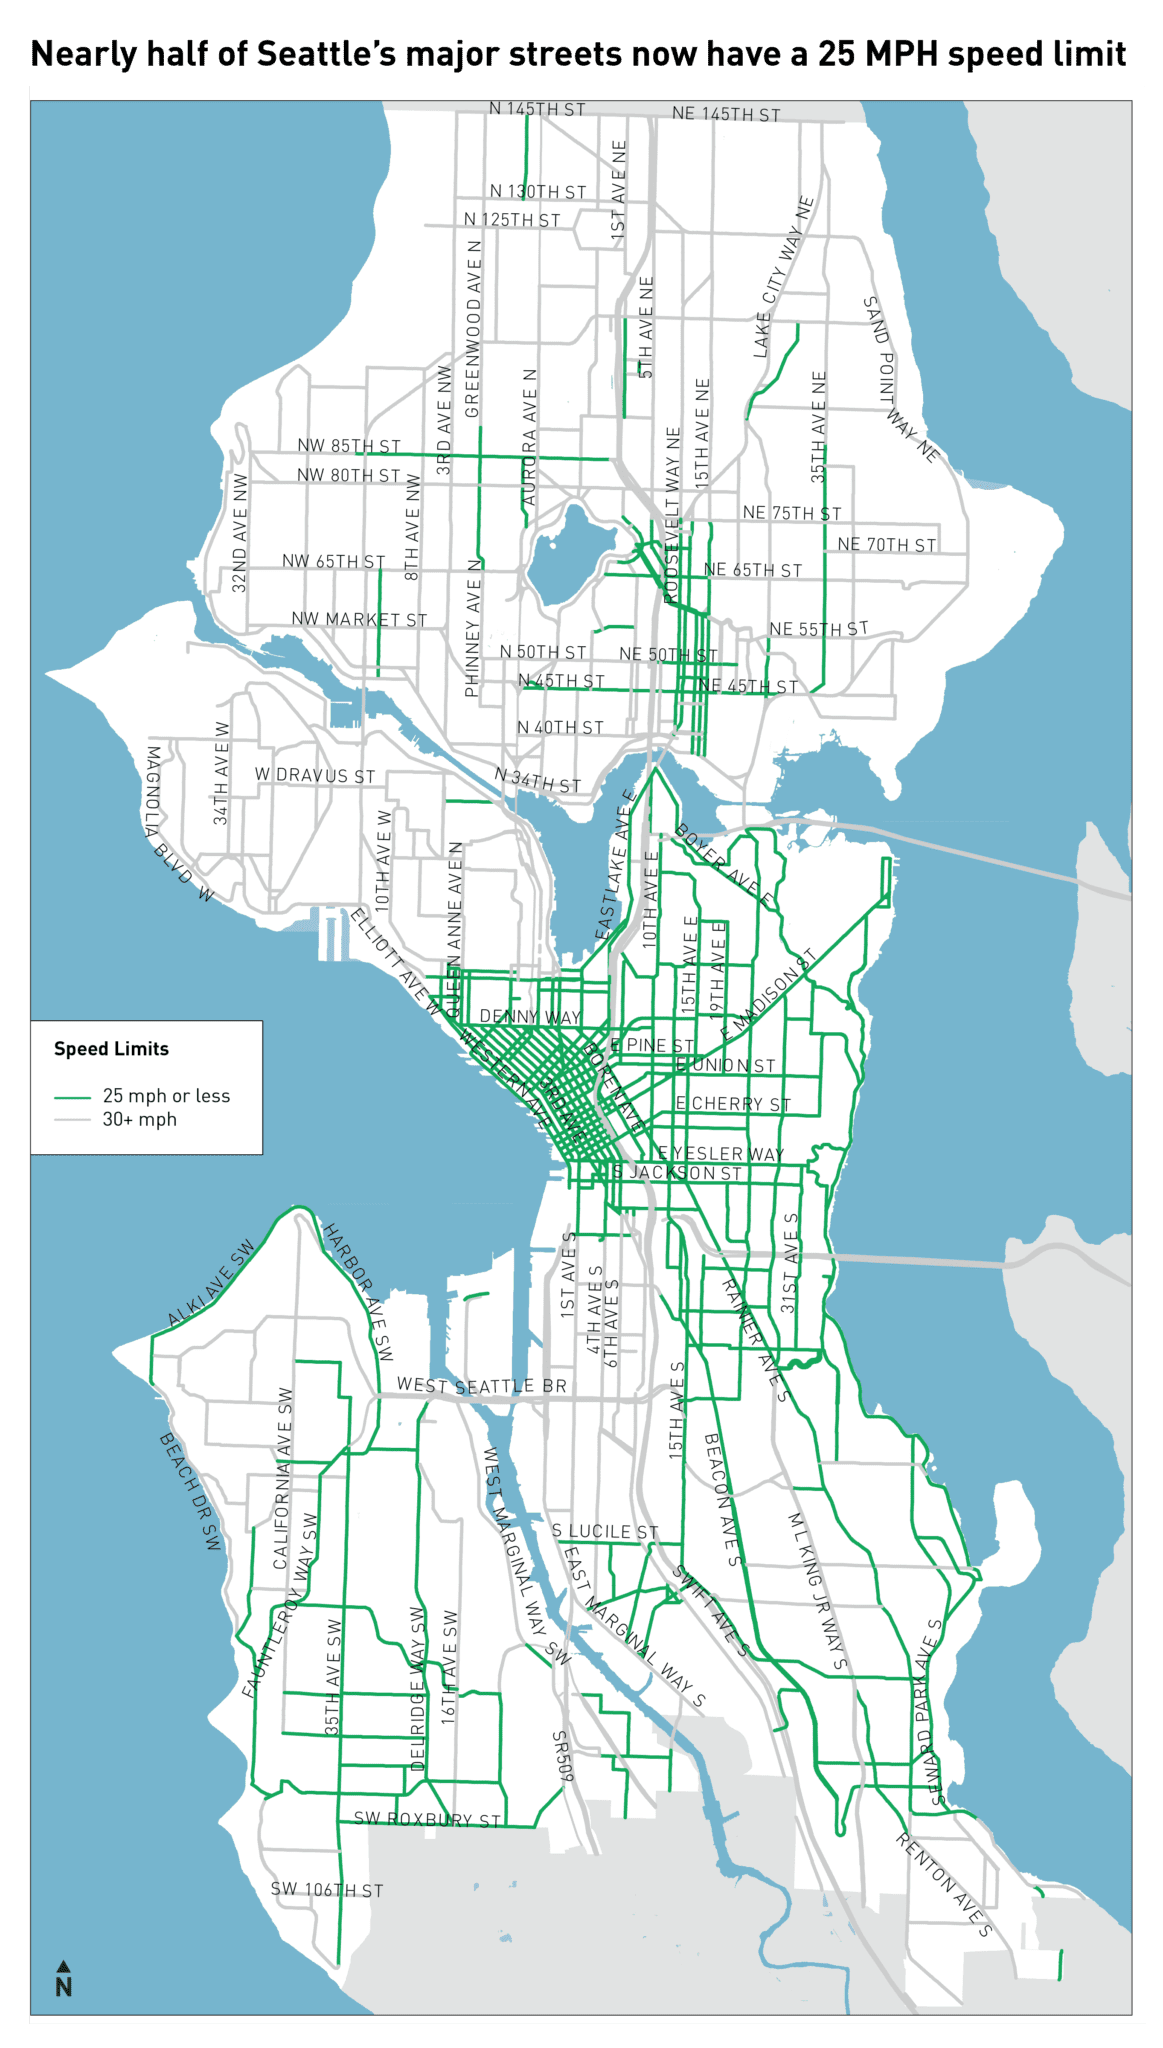 Map of Seattle showing that nearly half of Seattle’s major streets now have a 25 MPH speed limit